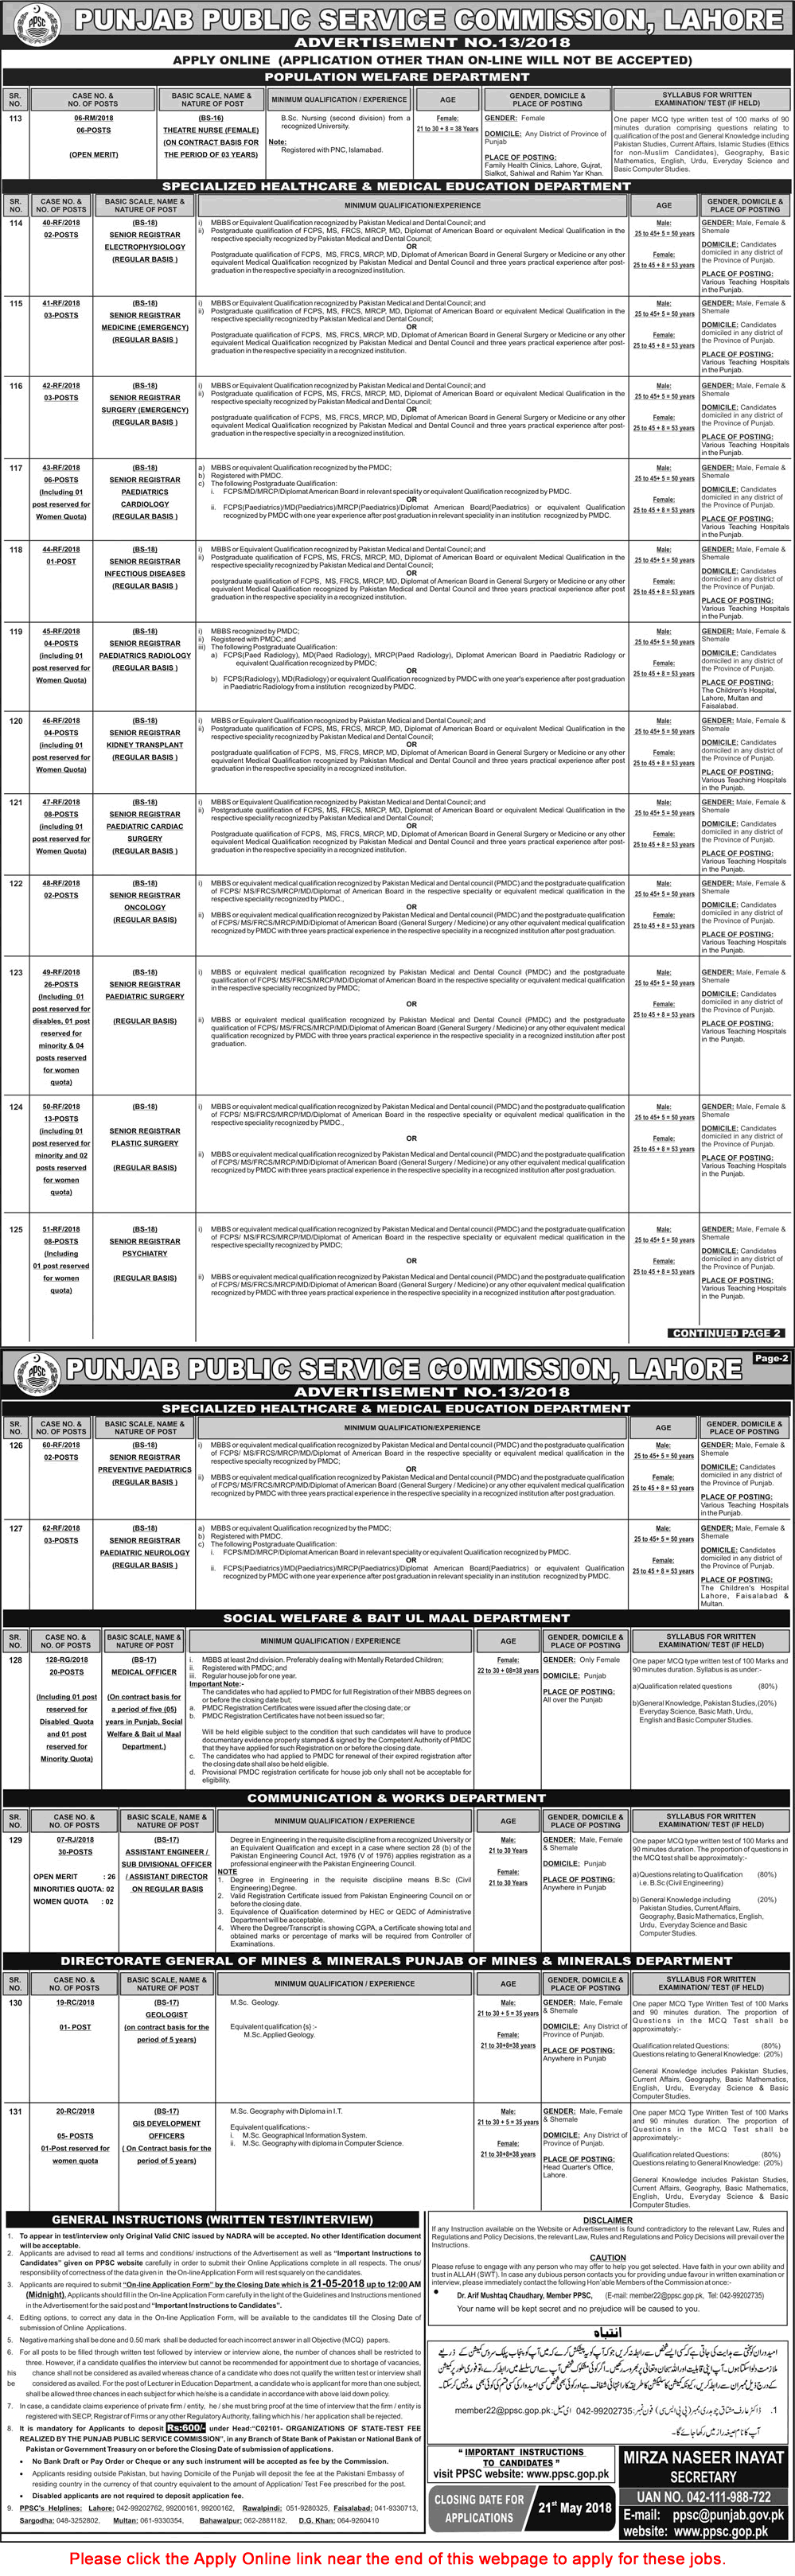 PPSC Jobs May 2018 Apply Online Consolidated Advertisement No 13/2018 Latest